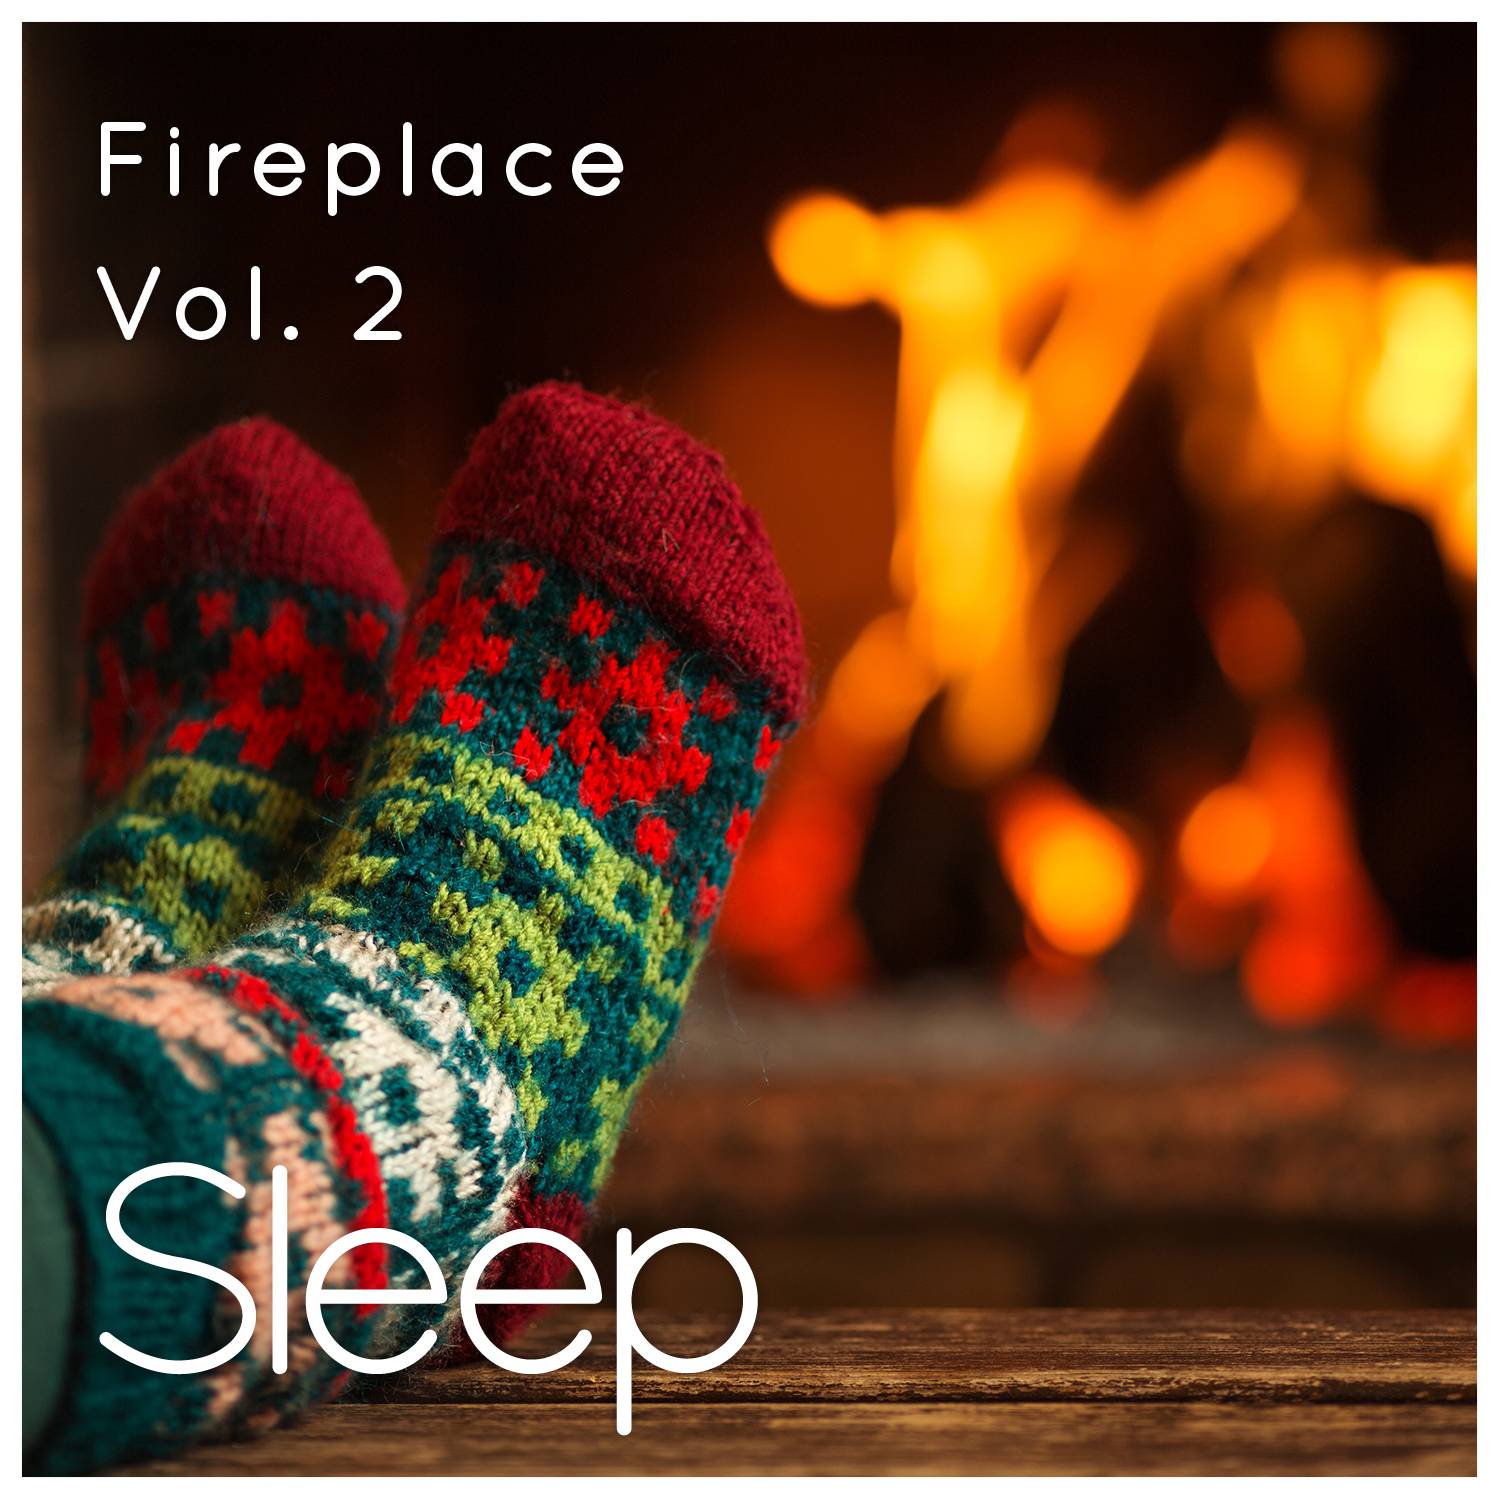 Burning Fireplace with Crackling Fire Sounds, Pt. 9